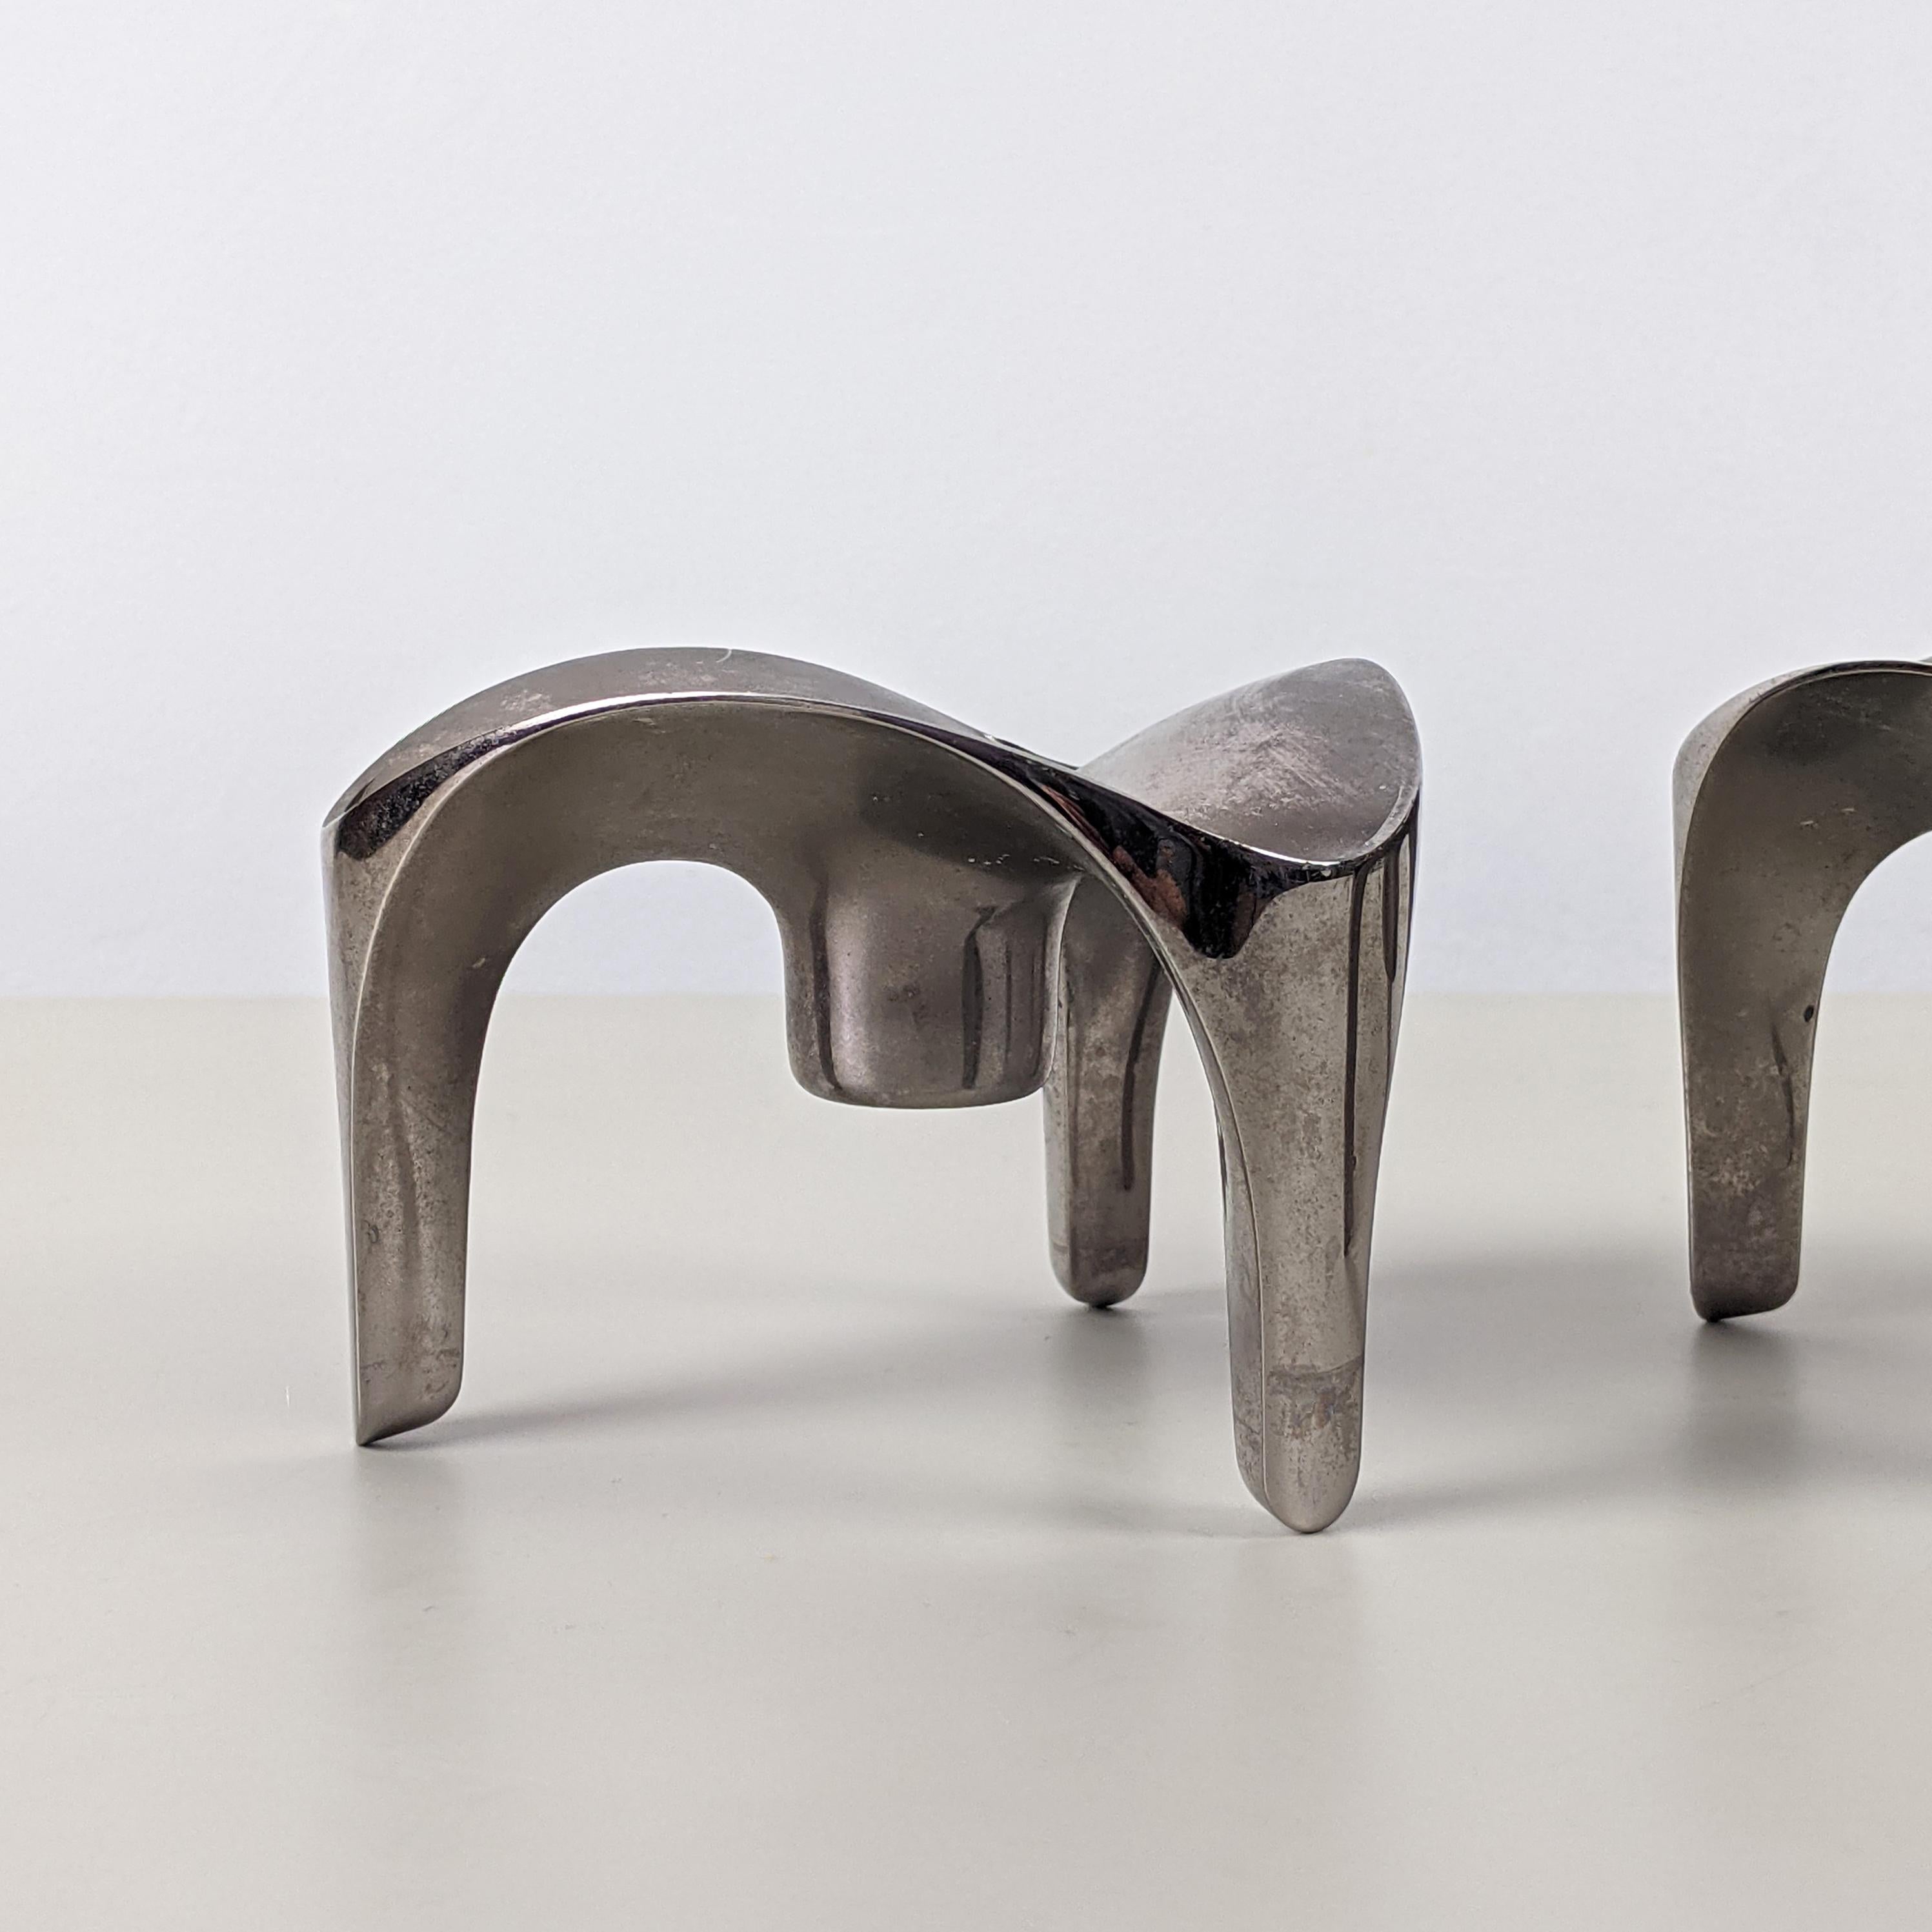 Caesar Stoffi for Nagel, Pair of Modular Stacking Elements/Candle Holders, 1970s For Sale 3